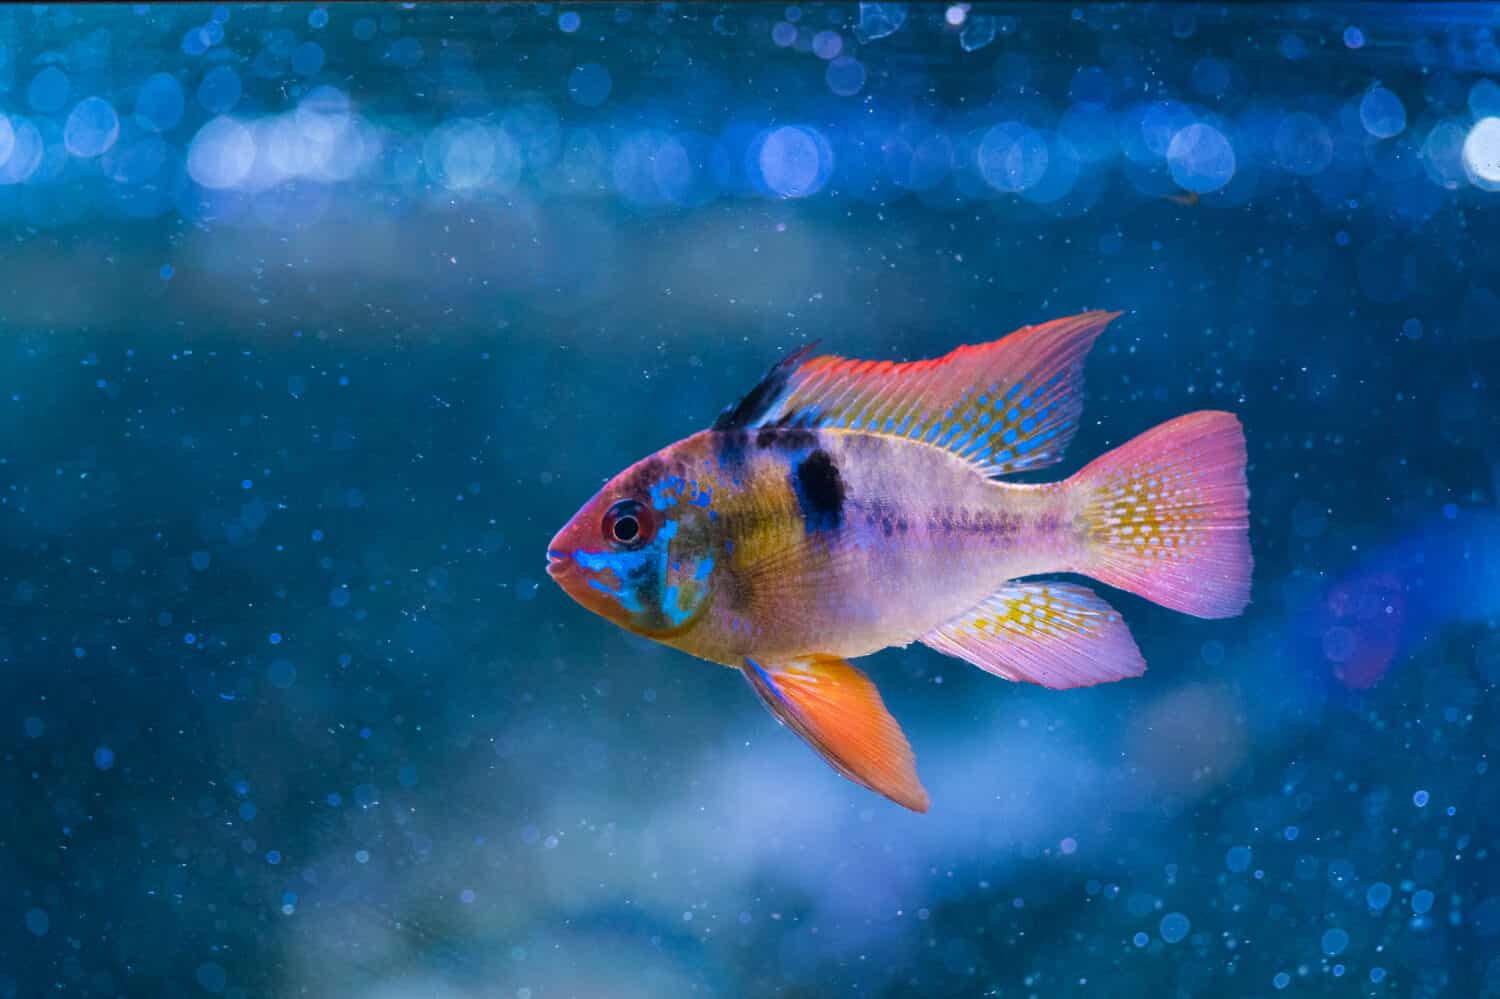 Ram cichlid male, Microgeophagus ramirezi surrounded by blue waterwith bubbles